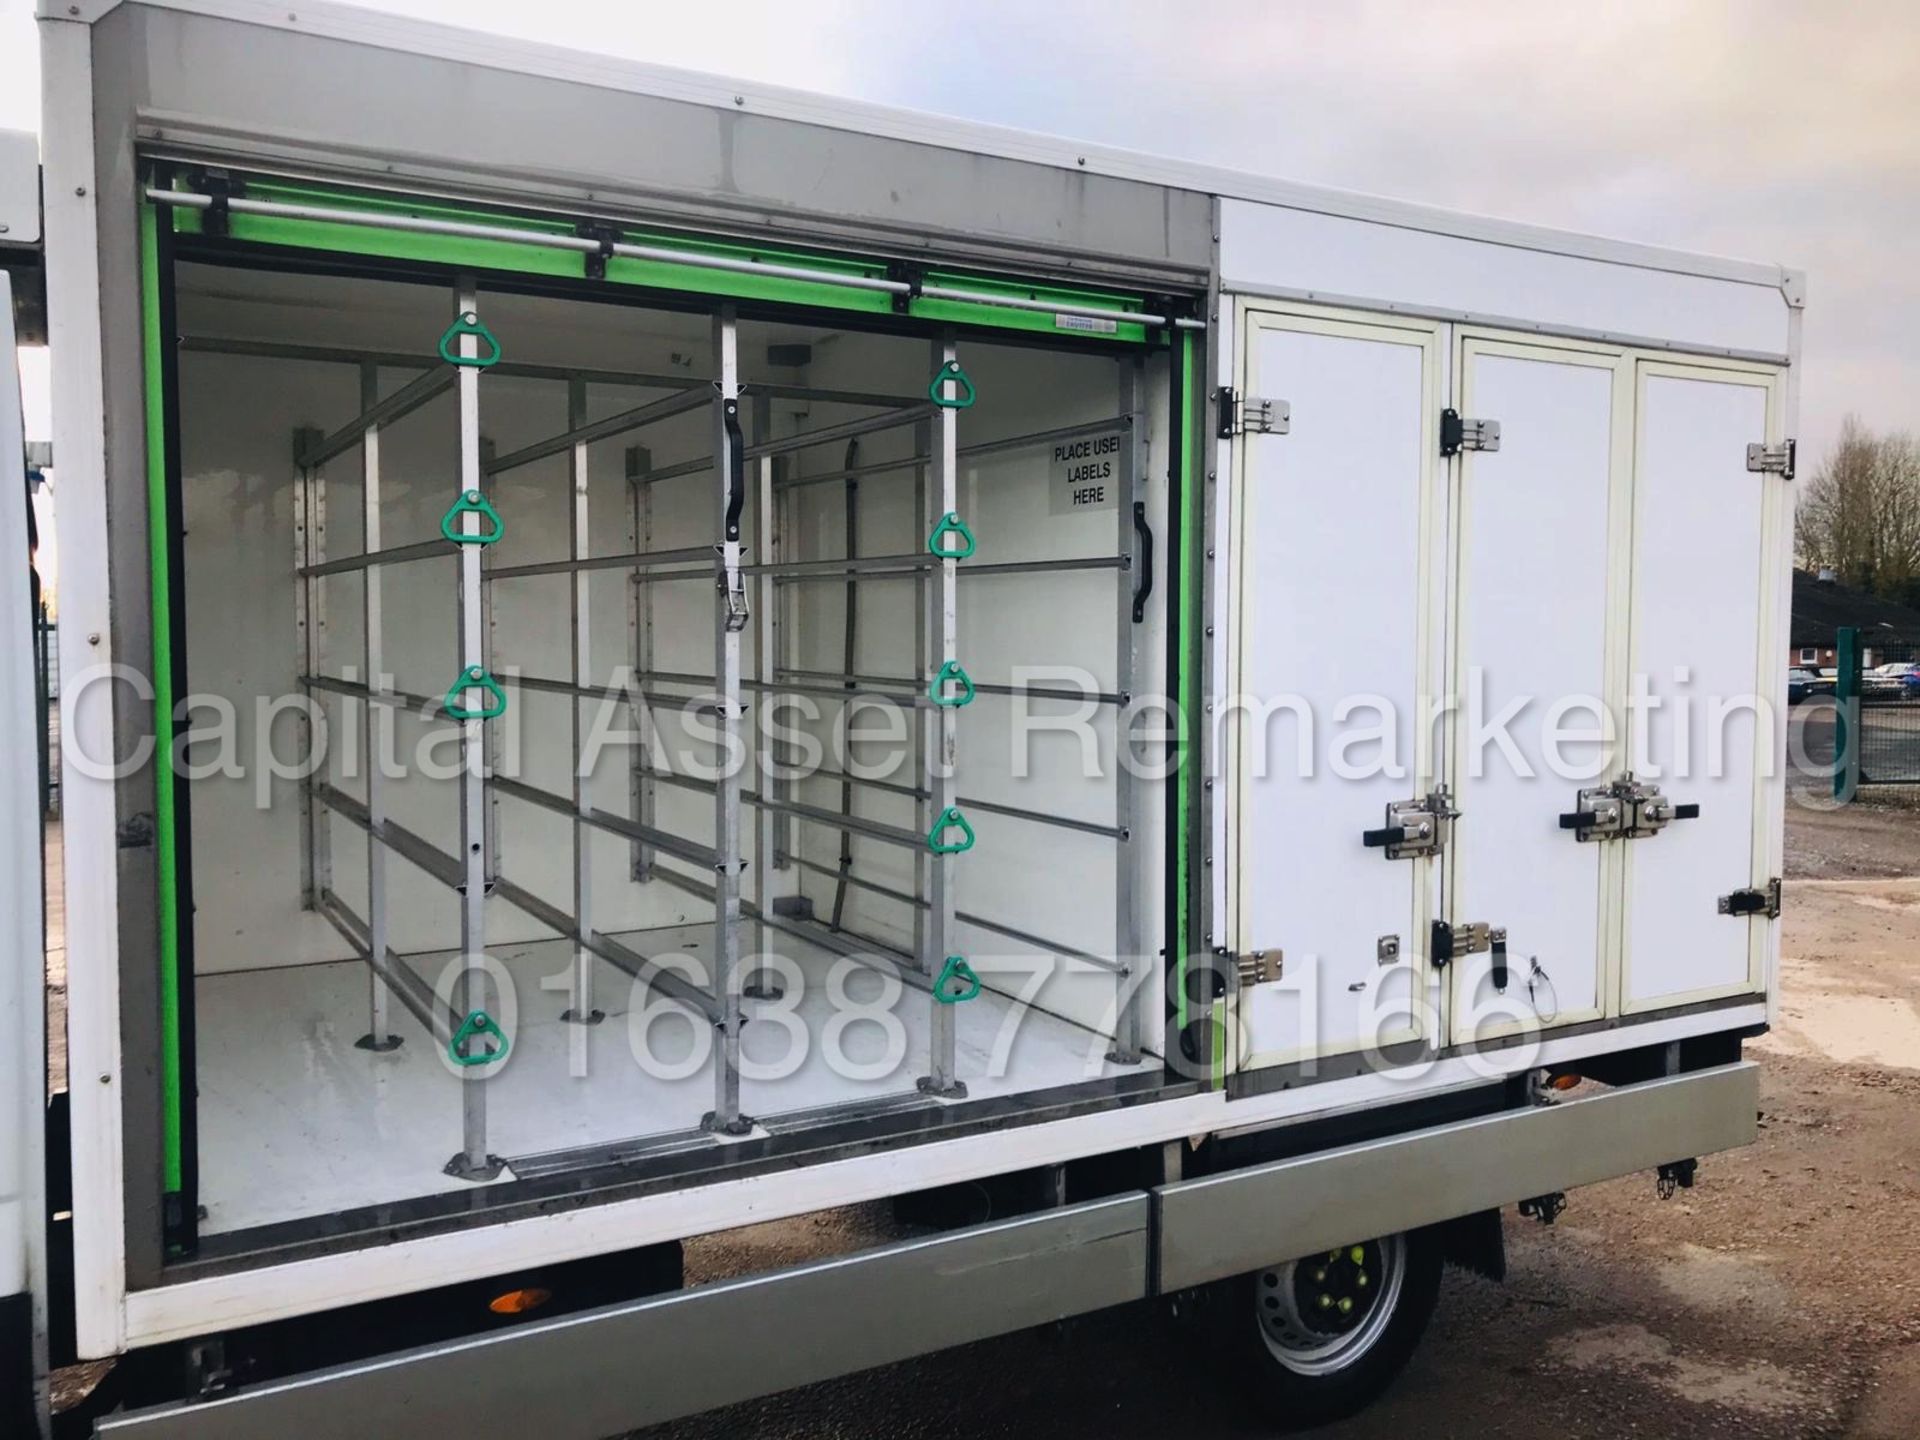 IVECO DAILY 35S11 *LWB - REFRIGERATED BOX* (2015 - NEW MODEL) '2.3 DIESEL - 8 SPEED AUTO' - Image 35 of 37